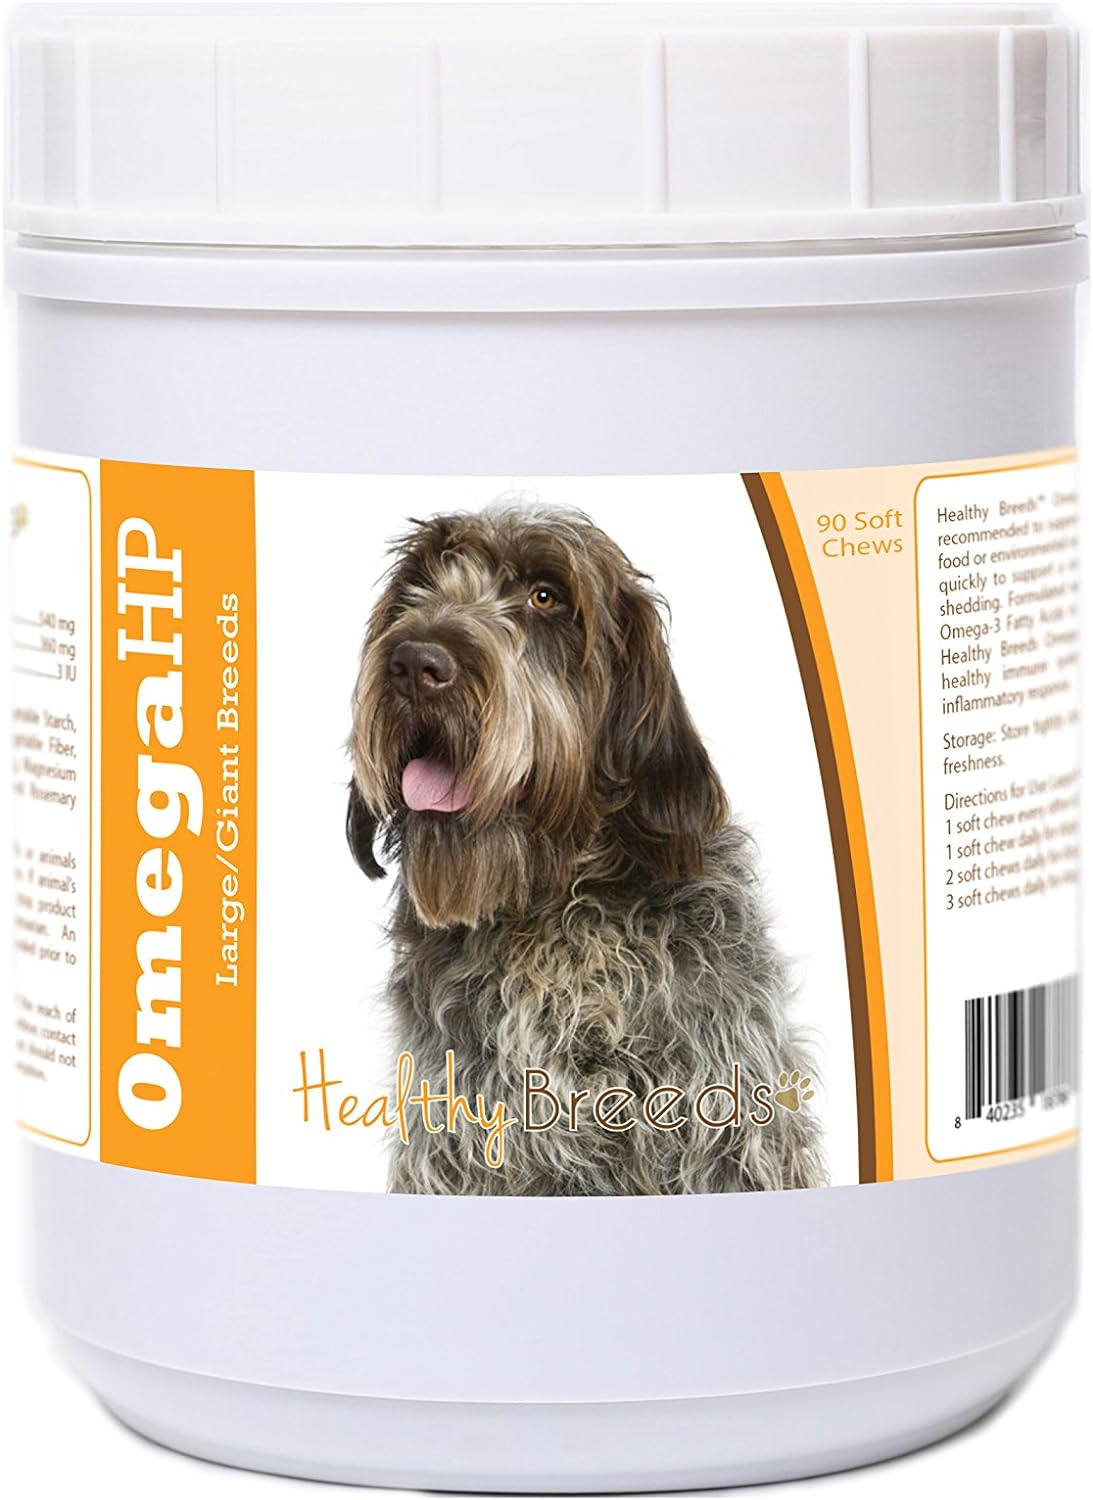 Healthy Breeds Wirehaired Pointing Griffon Omega HP Fatty Acid Skin and Coat Support Soft Chews 90 Count